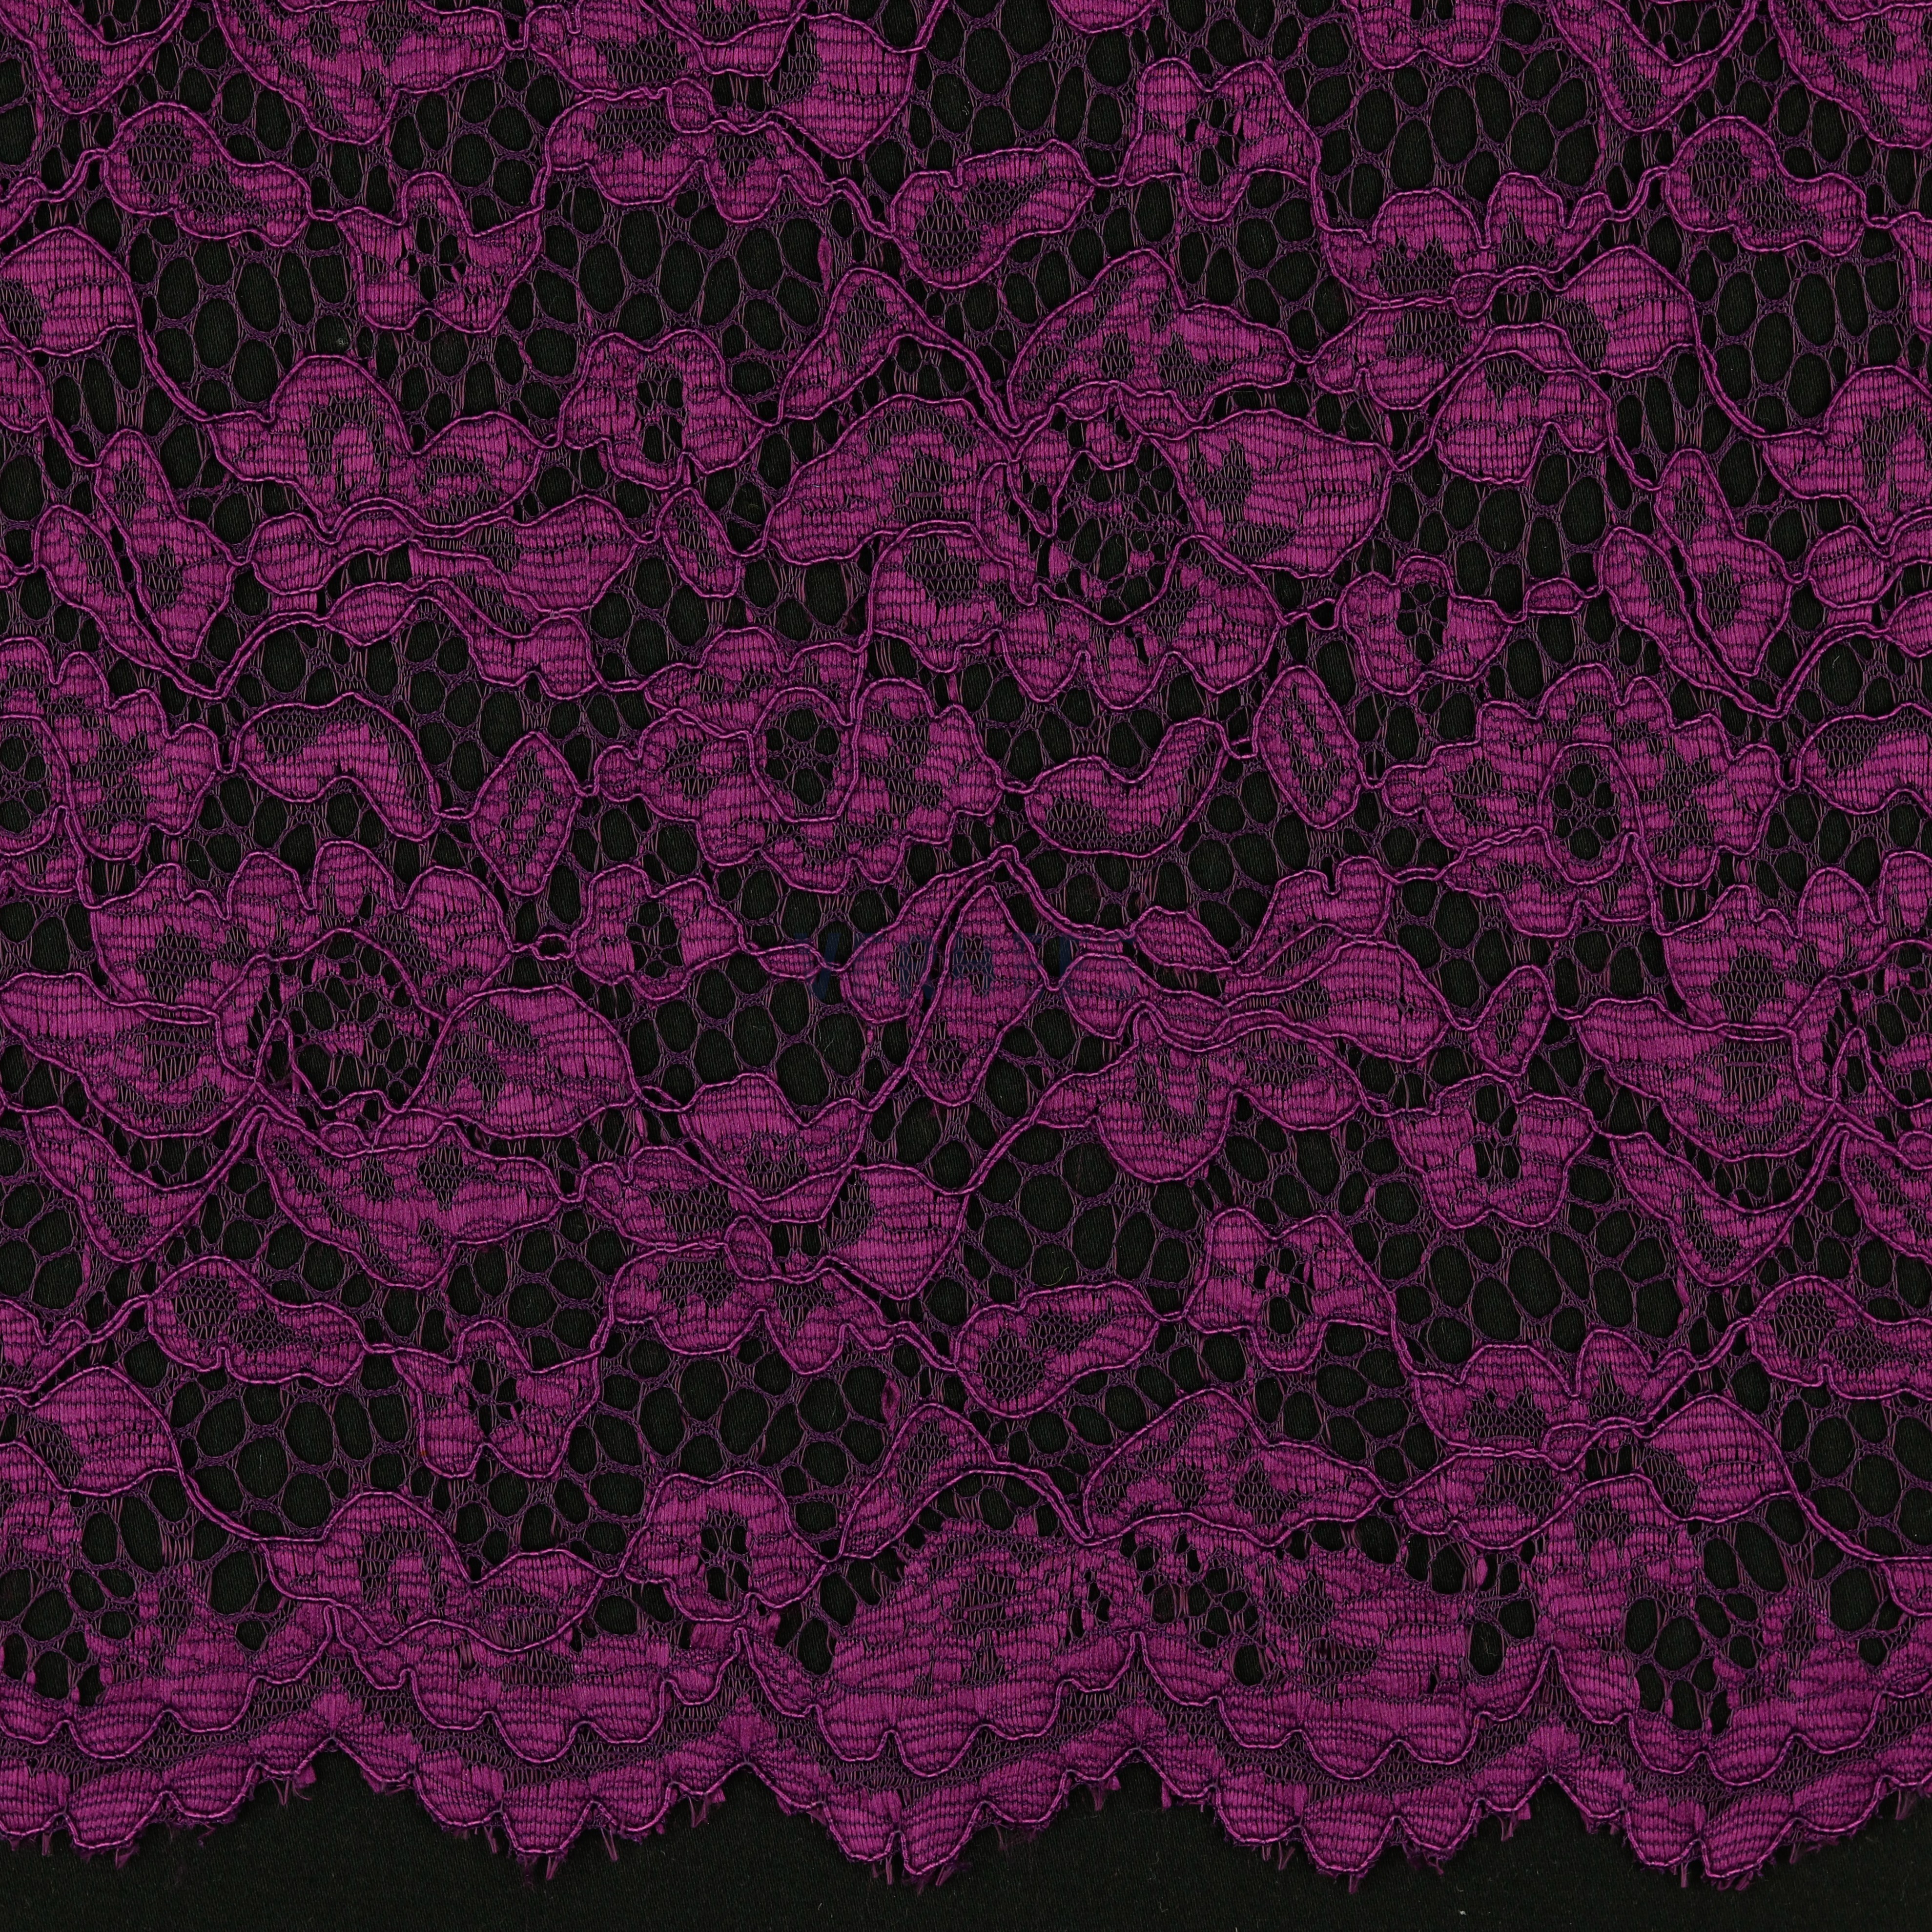 LACE BORDER 2 SIDES PURPLE (high resolution)